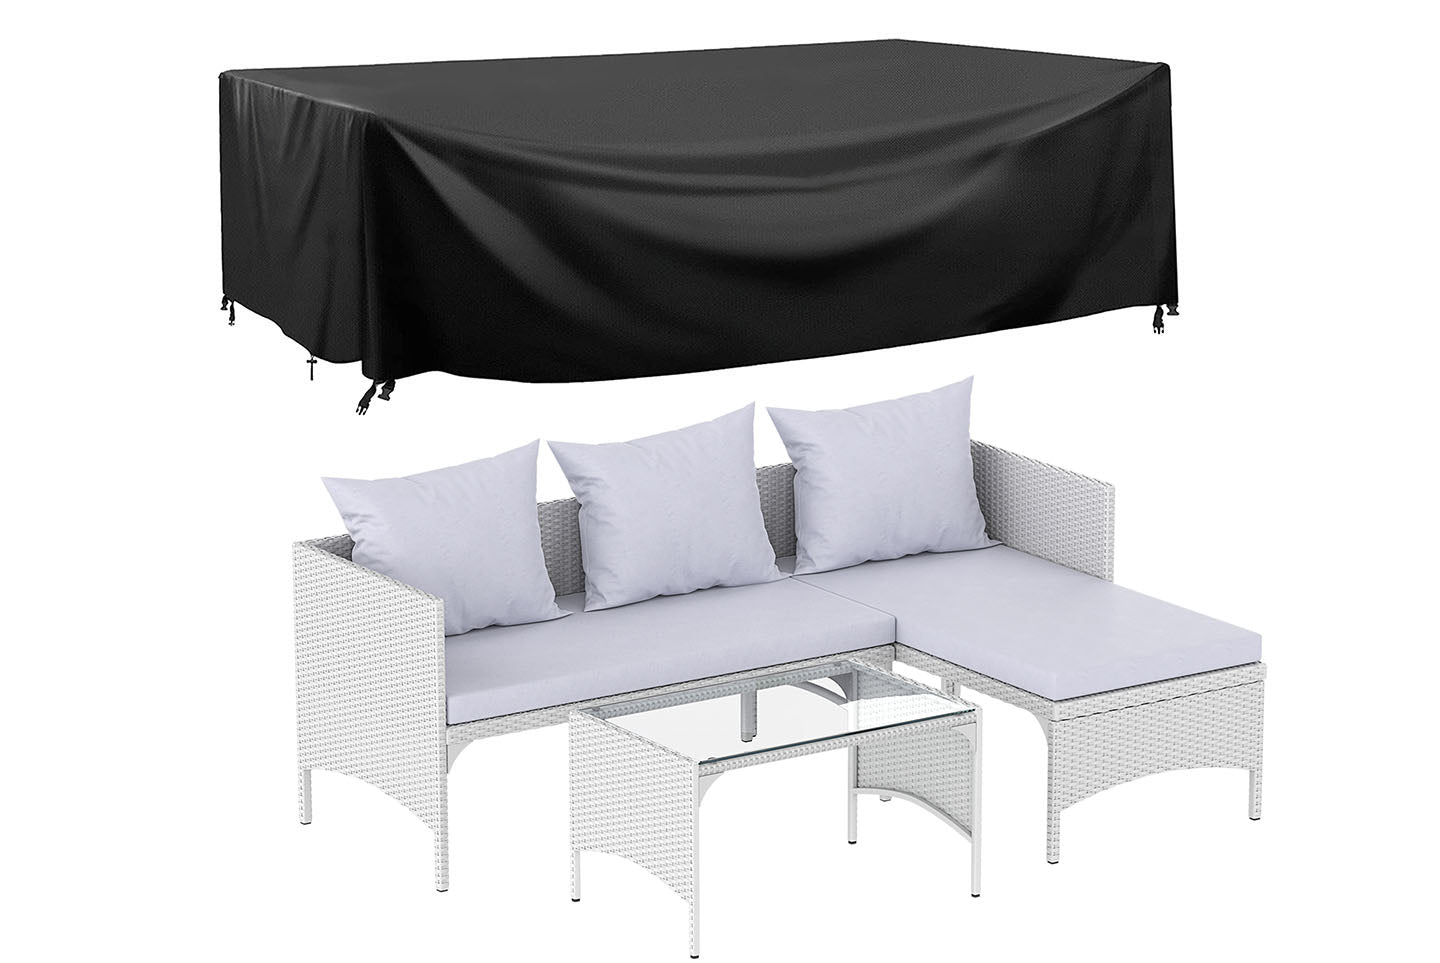 3 Piece Garden Lounge Sofa Set Rattan Furniture with Cushions Protective Cover Grey